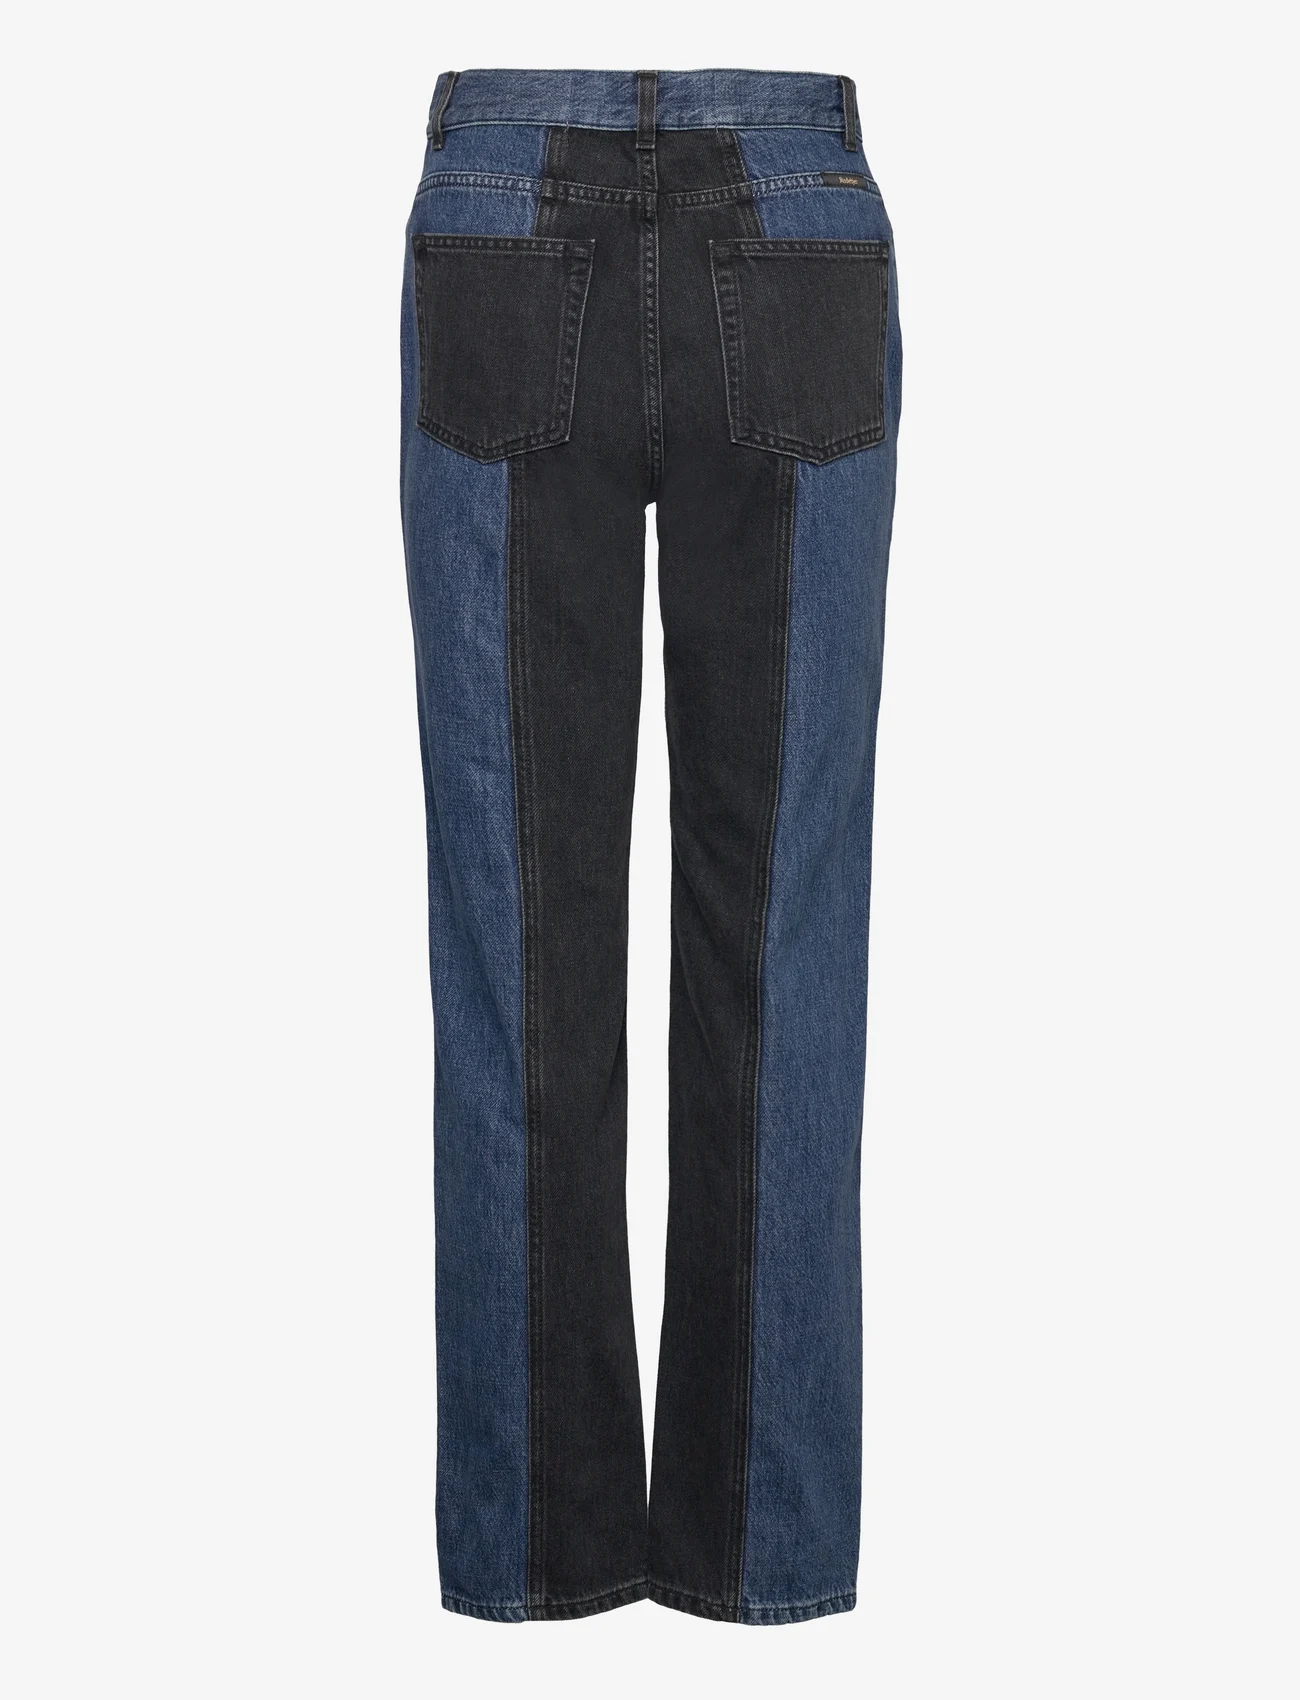 RODEBJER - Rodebjer Patchwork Straight - straight jeans - indigo/black - 1